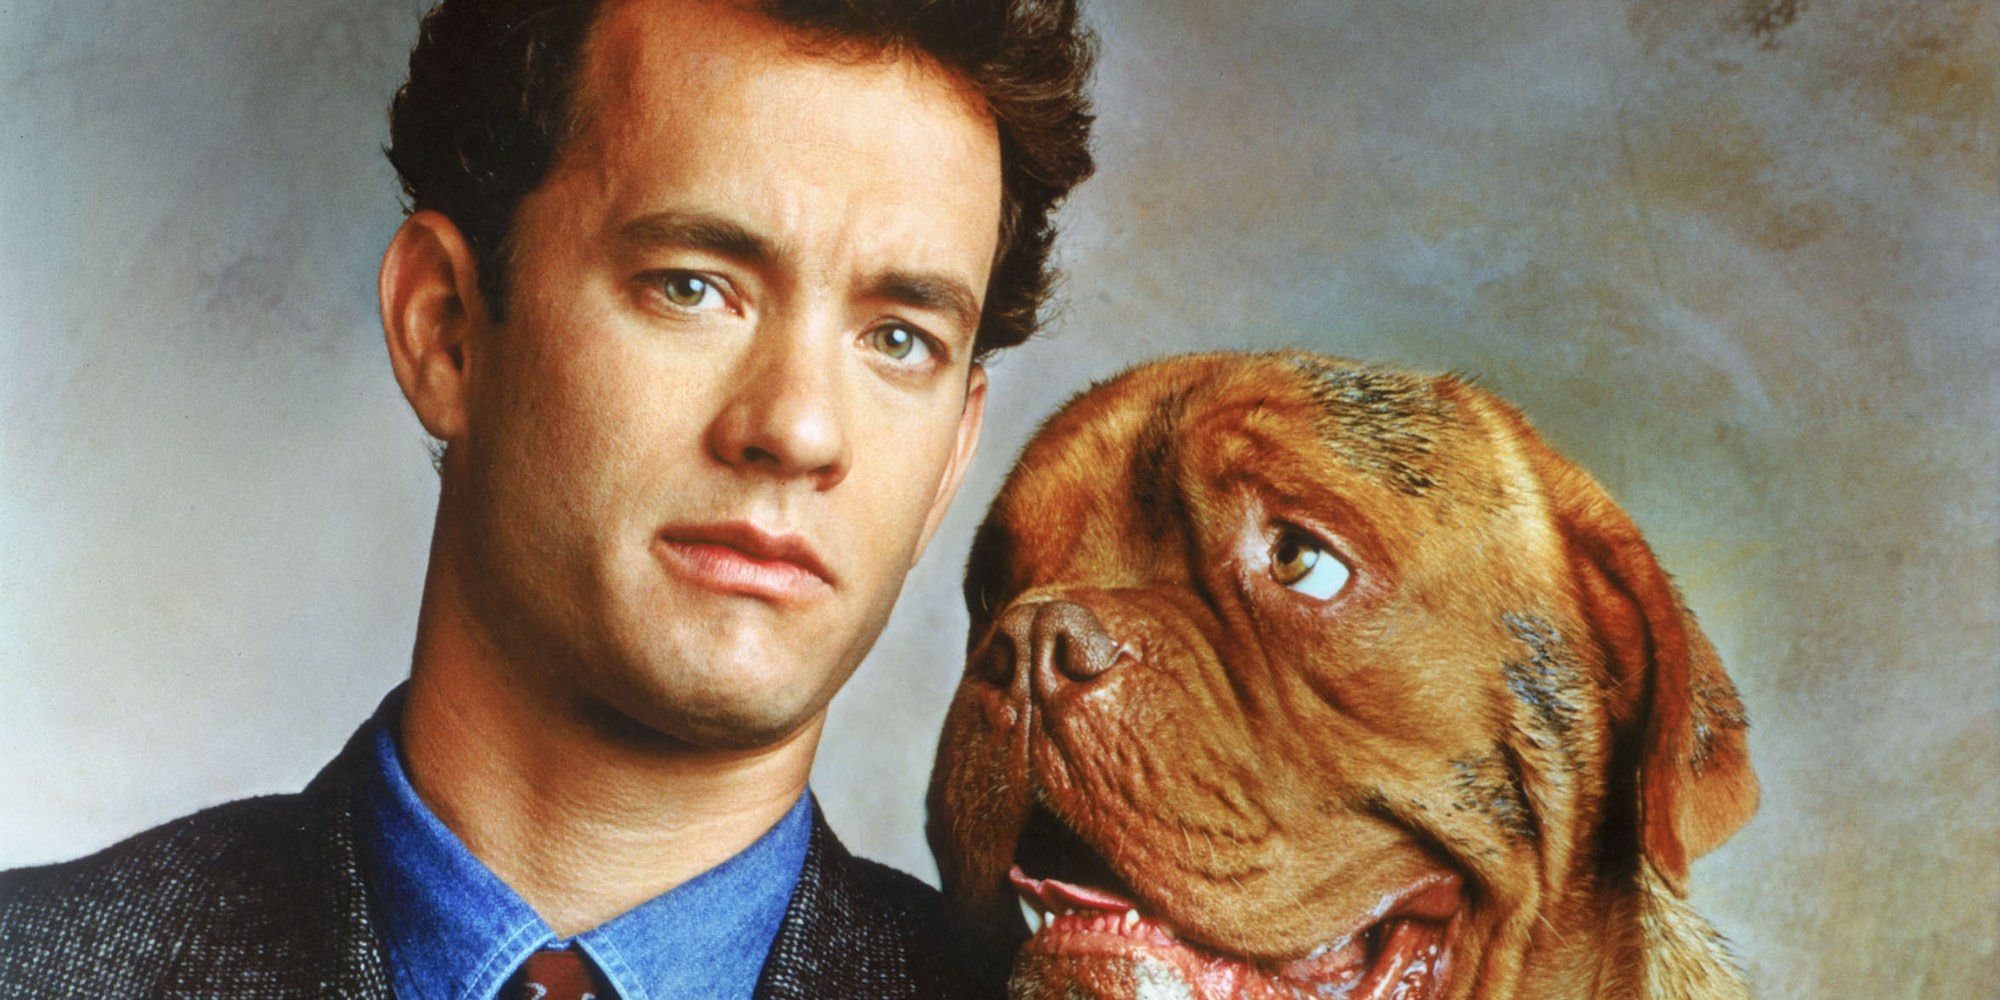 Tom Hanks and the dog looking at the camera in Turner and Hooch